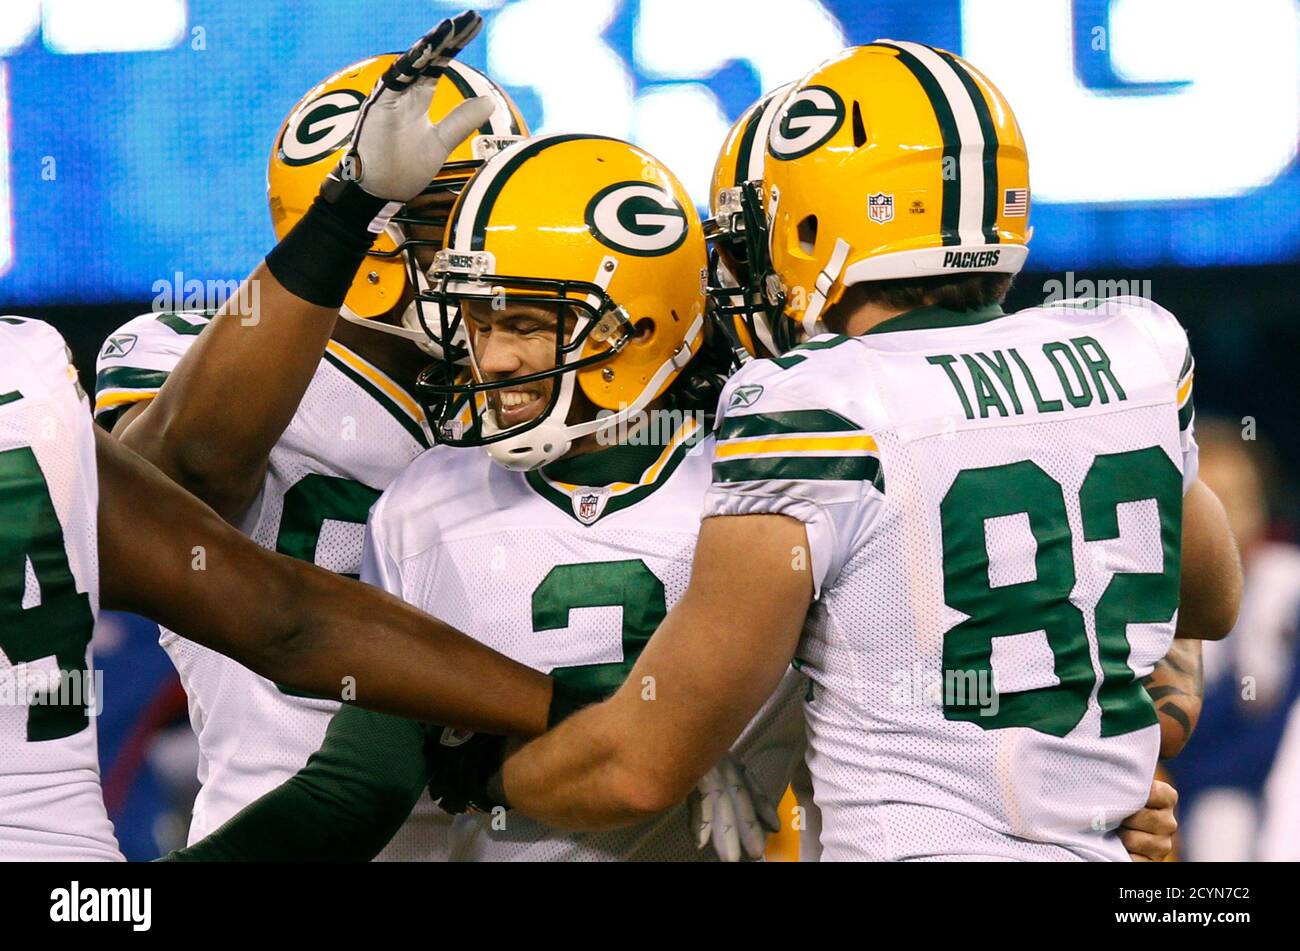 Green Bay Packers kicker Mason Crosby (C) celebrates with his teammates  Ryan Taylor (R) and Howard Green (L) after making the game winning field  goal as time expired in the fourth quarter